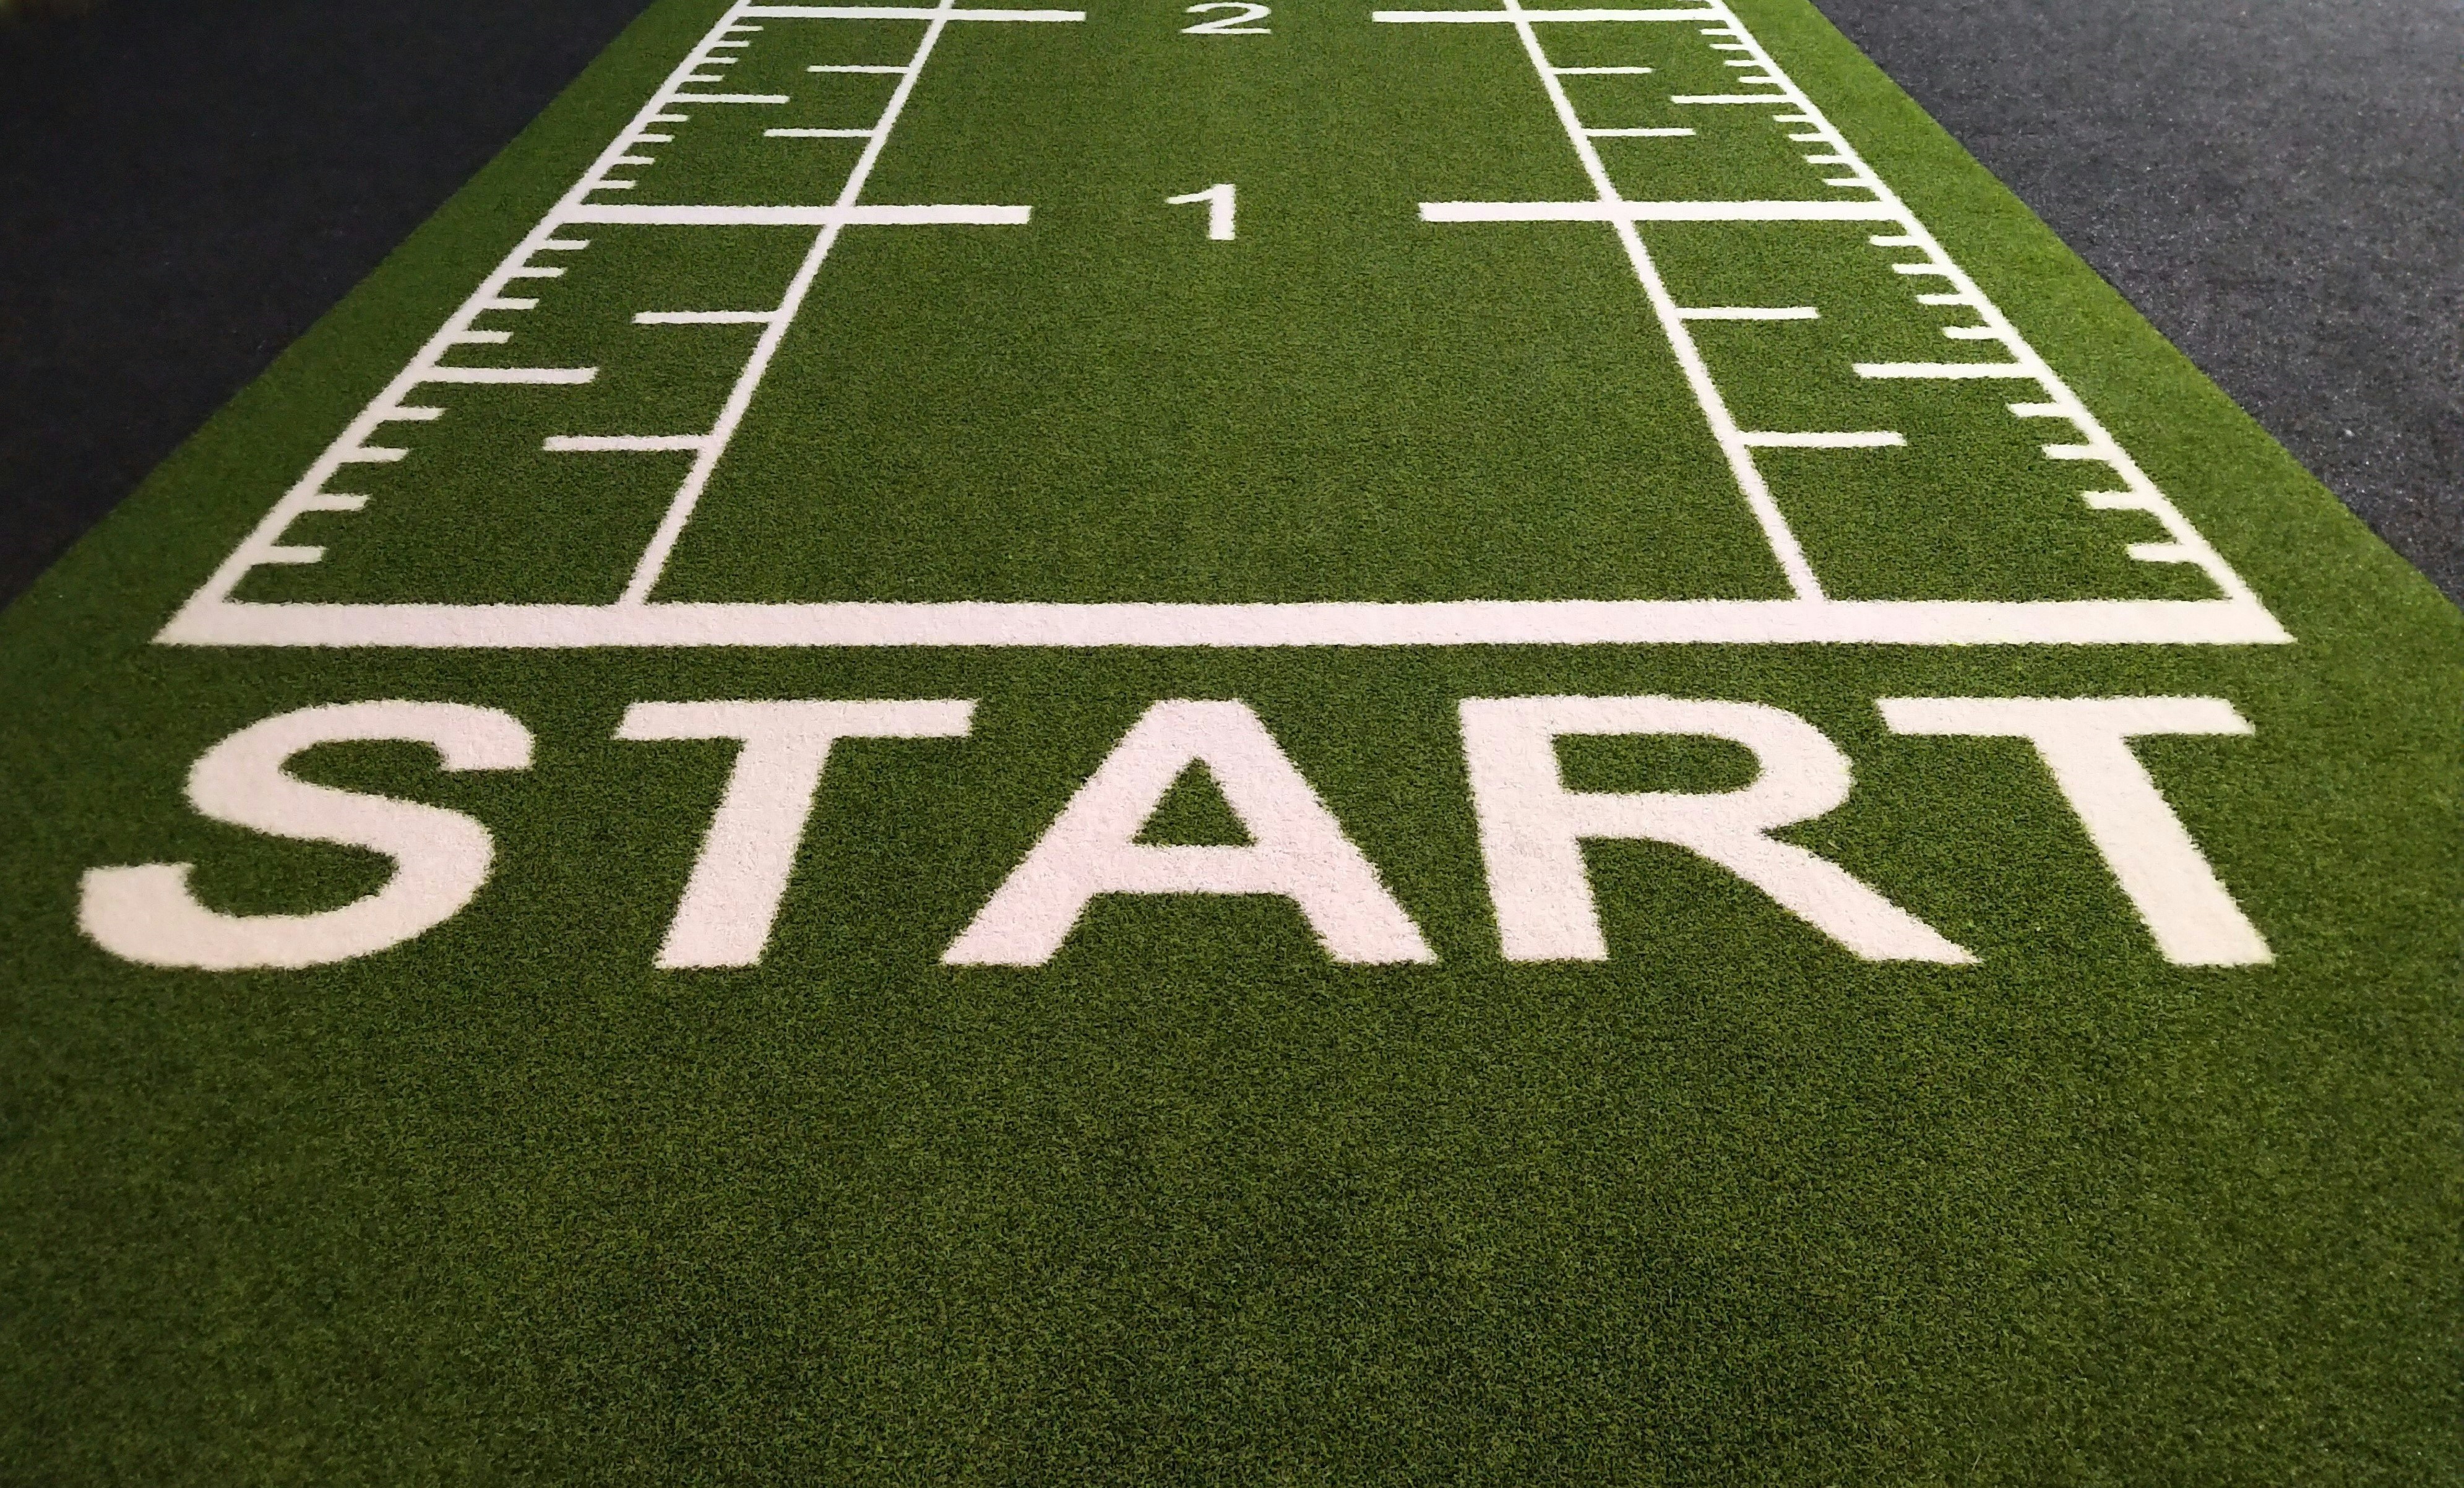 Start line of a racing lane for running track